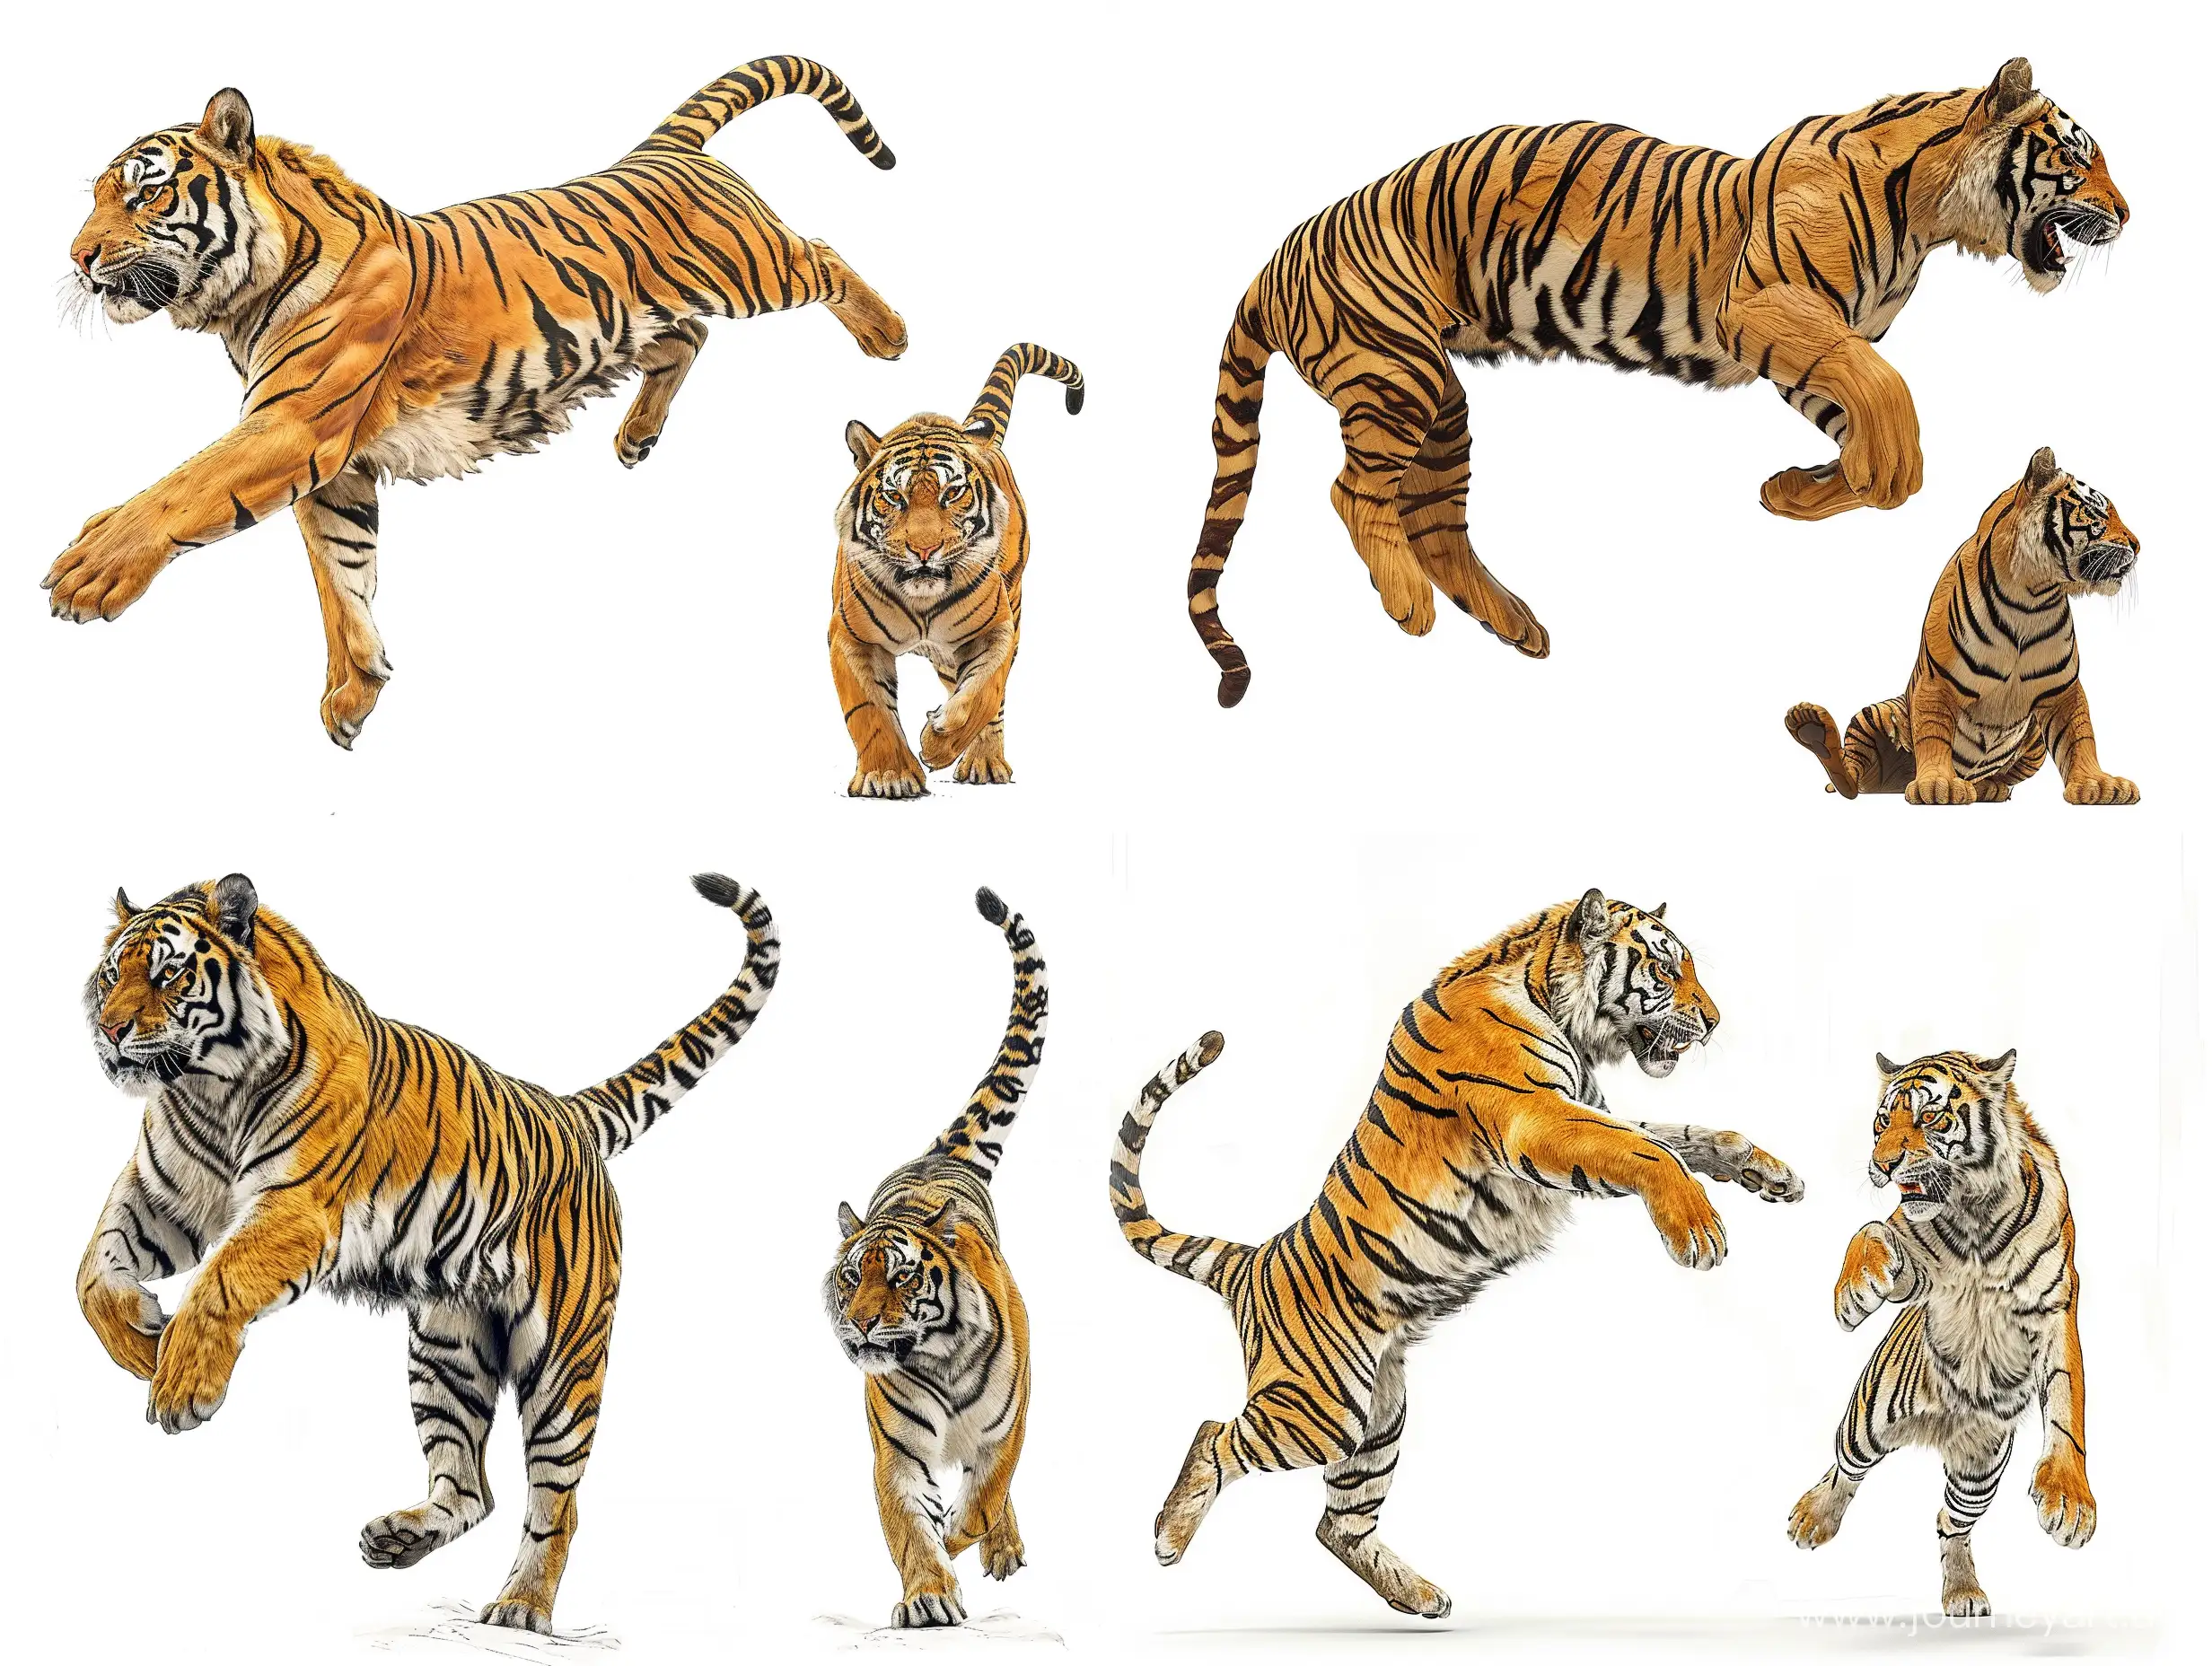 Realistic-Wooden-Tiger-Sculpture-Dynamic-FullLength-Views